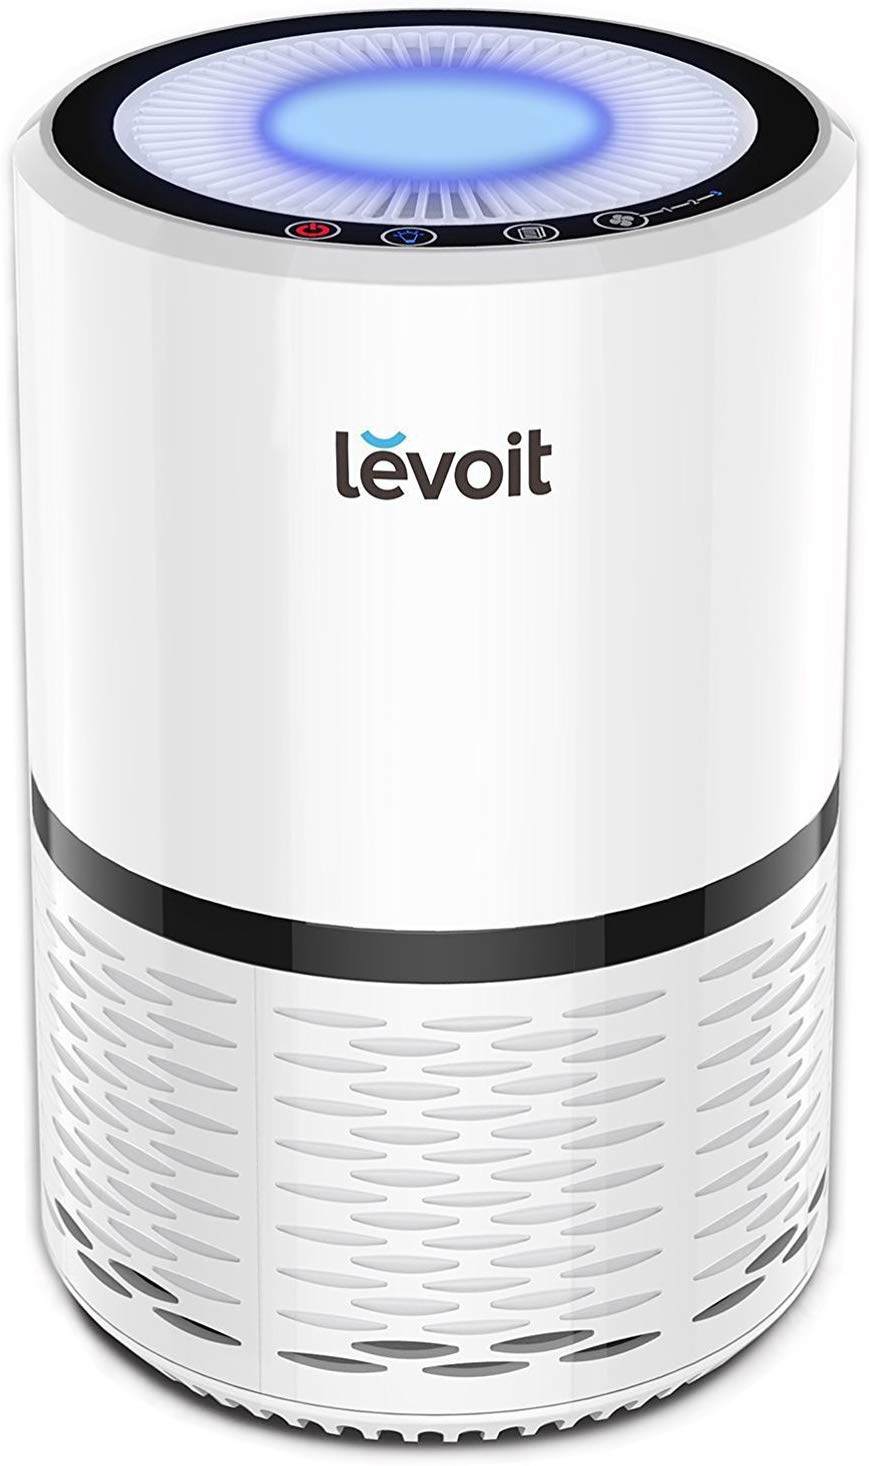 LEVOIT Ozone-Free Electrostatic Air Purifier With HEPA Filter